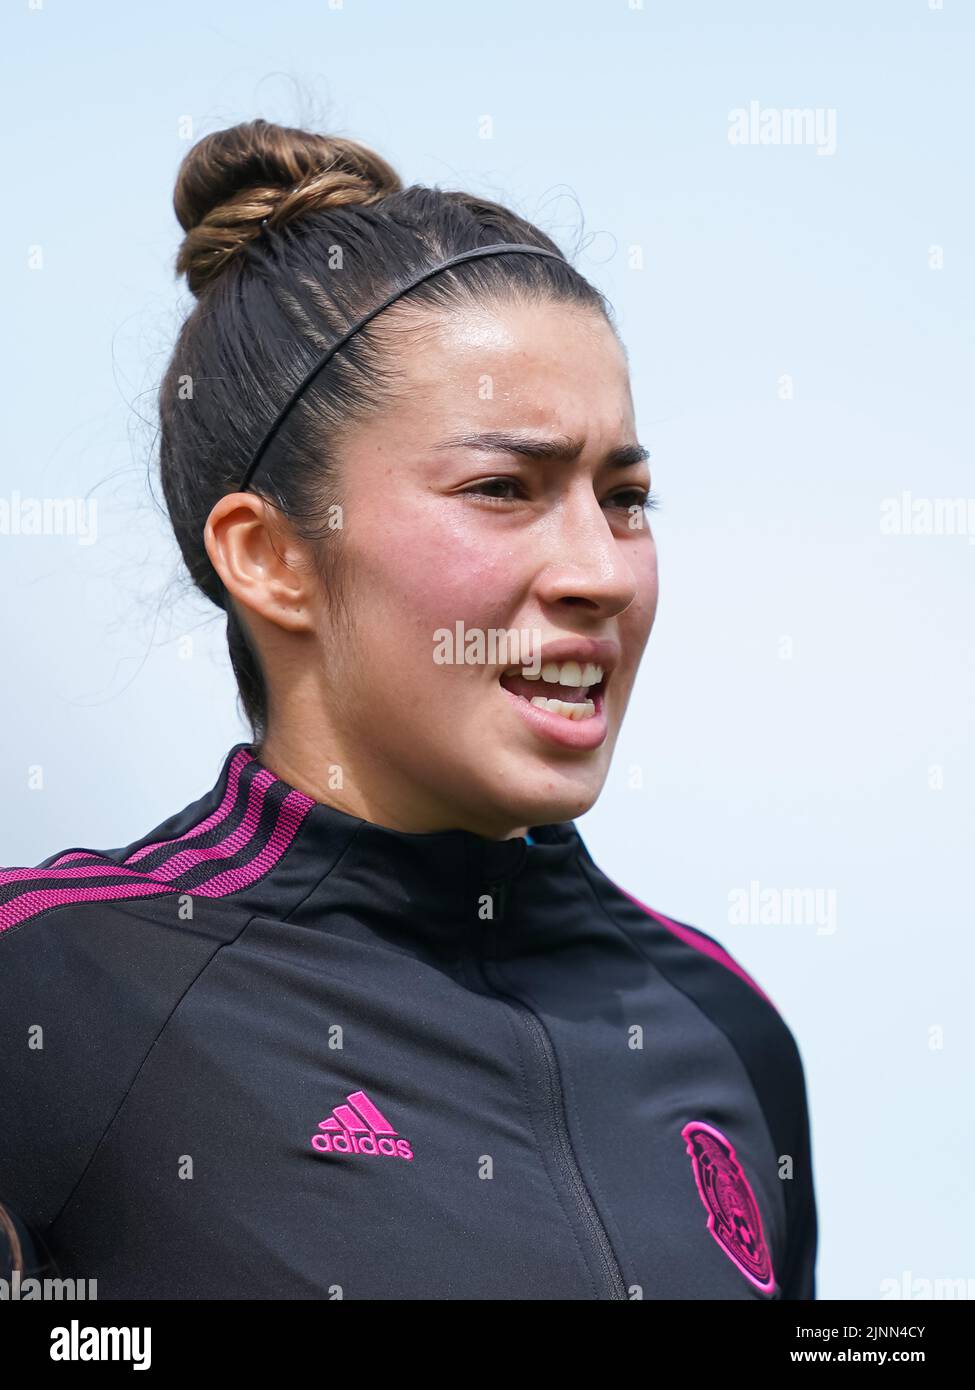 Alajuela, Costa Rica. 10th Aug, 2022. Alajuela, Costa Rica, August 10th 2022: Portrait (headshot/close up) of goalkeeper Celeste Espino (1 Mexico) during the national anthem prior to the FIFA U20 Womens World Cup Costa Rica 2022 football match between New Zealand and Mexico at Morera Soto in Alajuela, Costa Rica. (Daniela Porcelli/SPP) Credit: SPP Sport Press Photo. /Alamy Live News Stock Photo